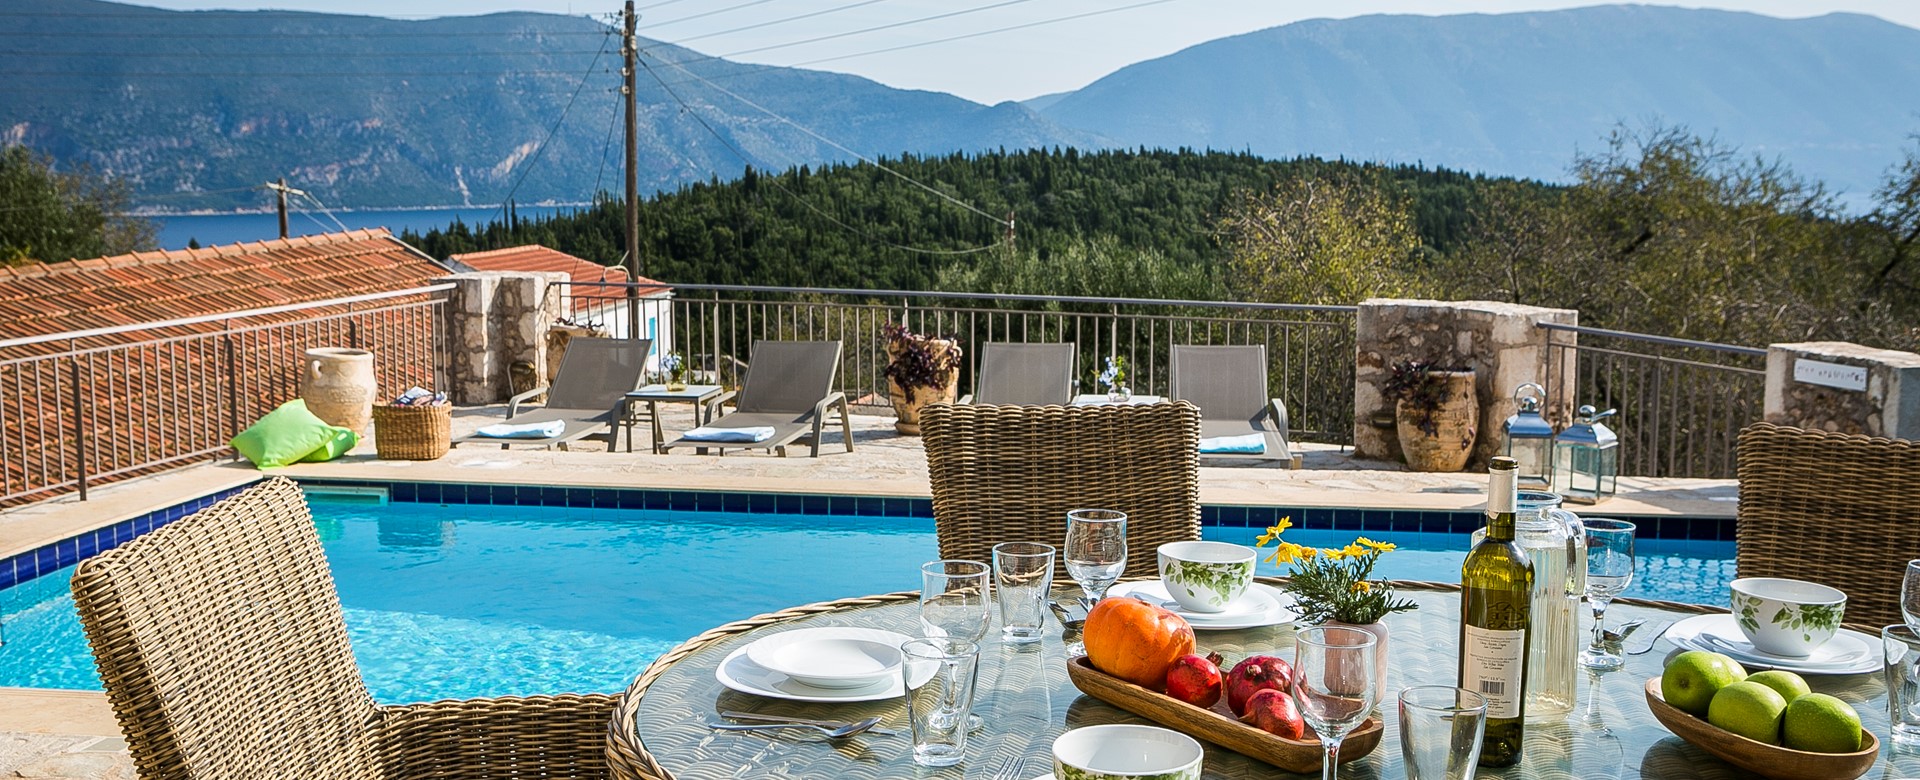 Breakfast lunch and diner by the pool together all throughout your holiday in Villa Pelagia, Fiscardo, Kefalonia, Greek Islands